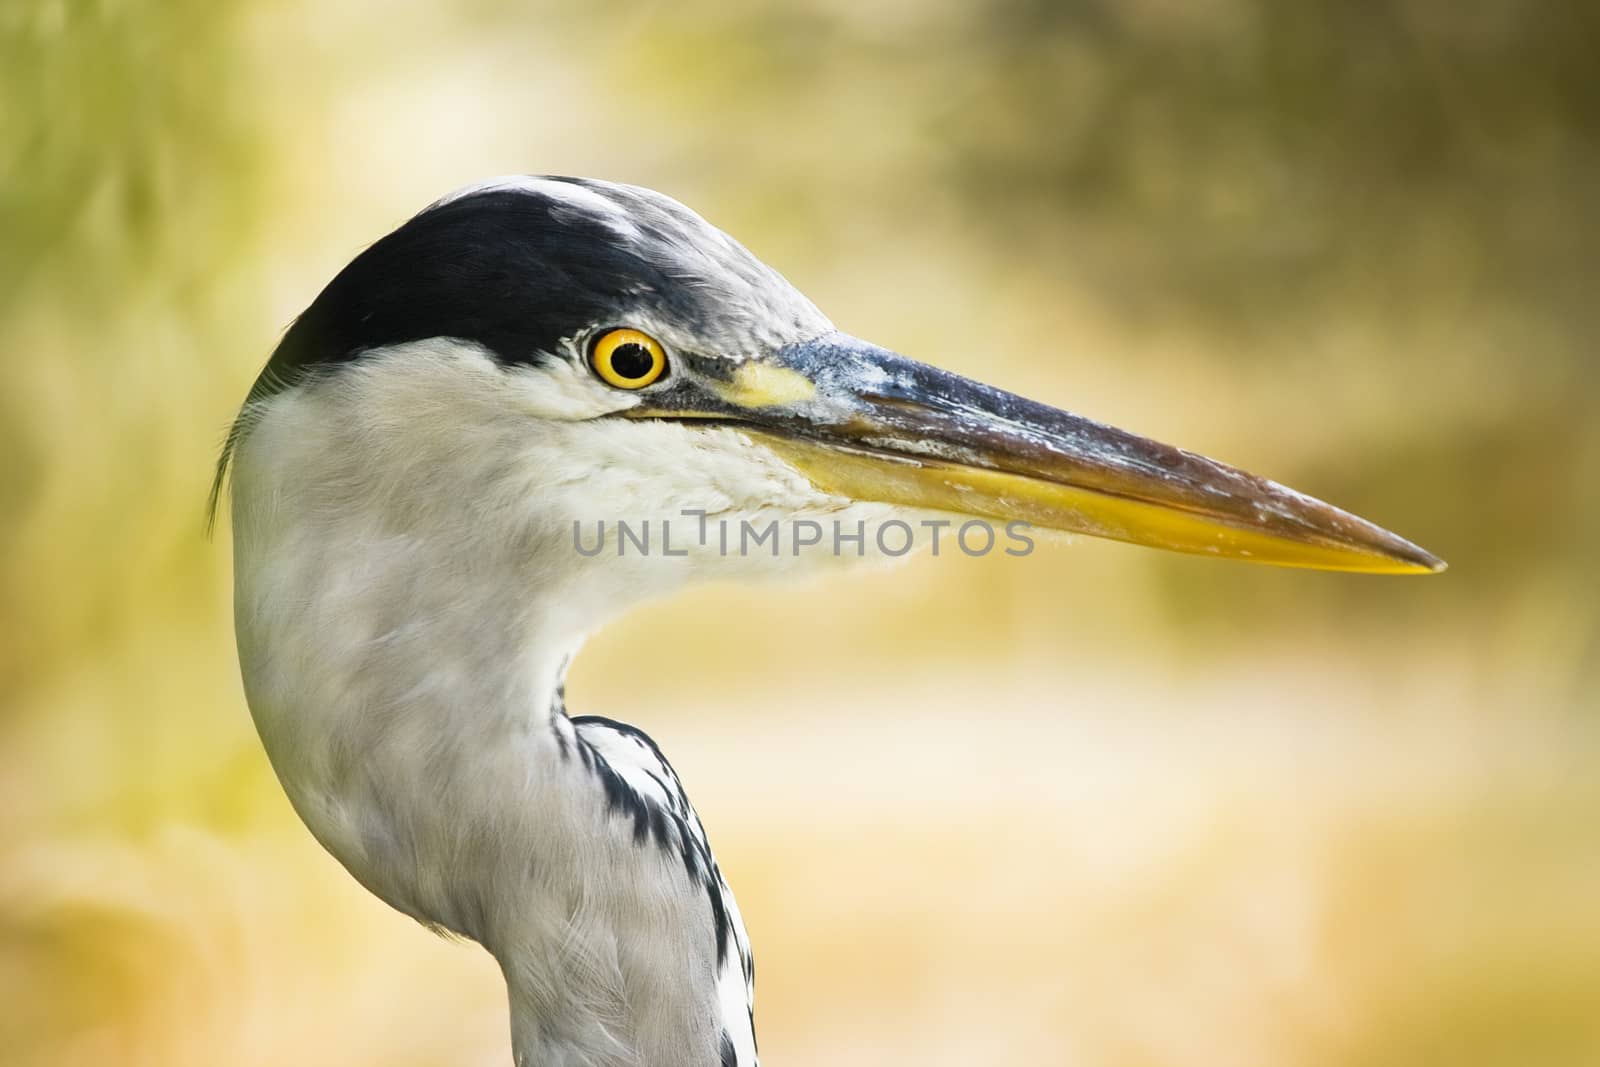 Grey heron head in side angle view by Colette